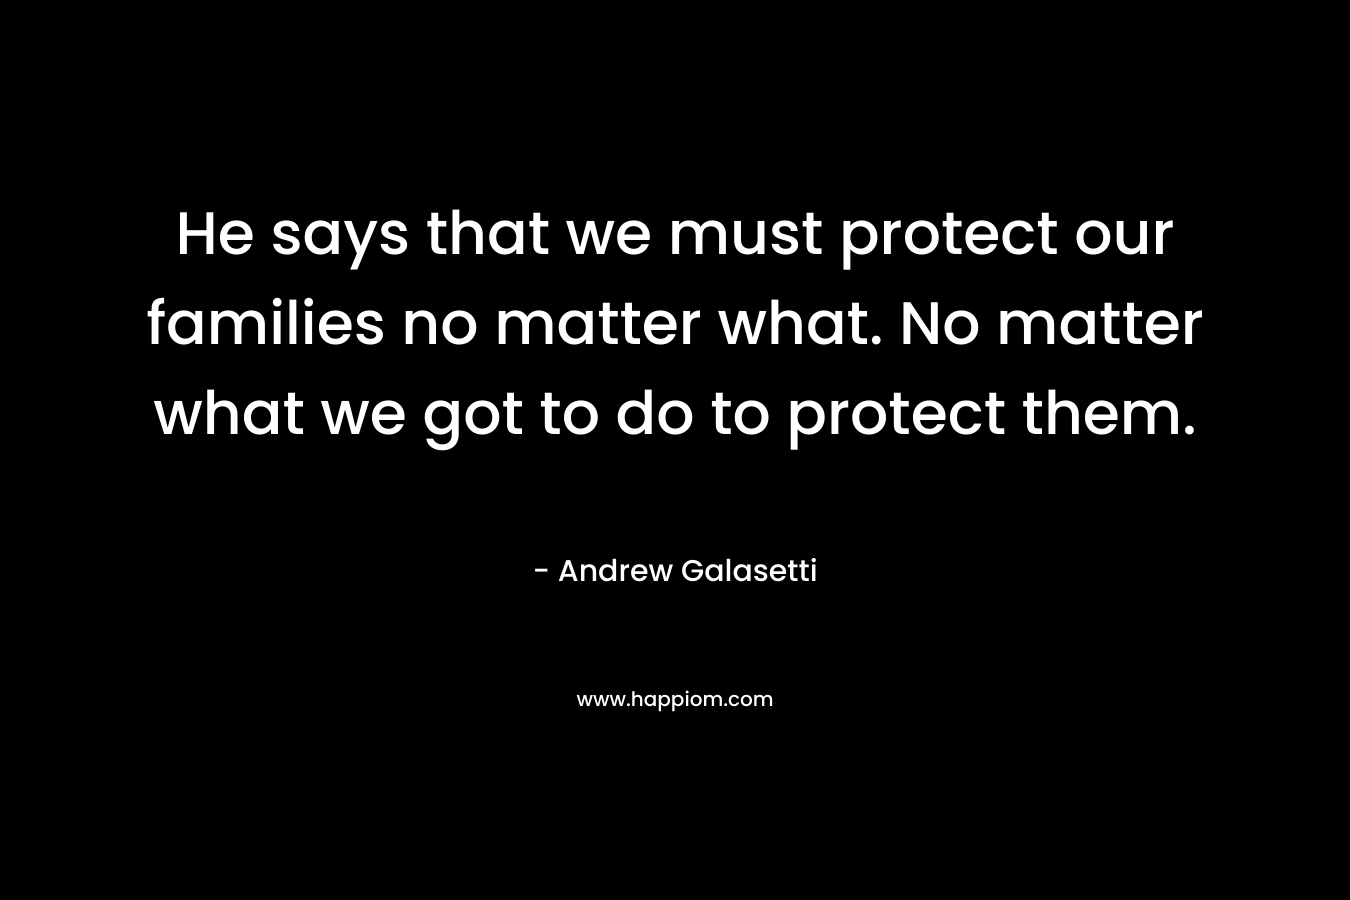 He says that we must protect our families no matter what. No matter what we got to do to protect them. – Andrew Galasetti